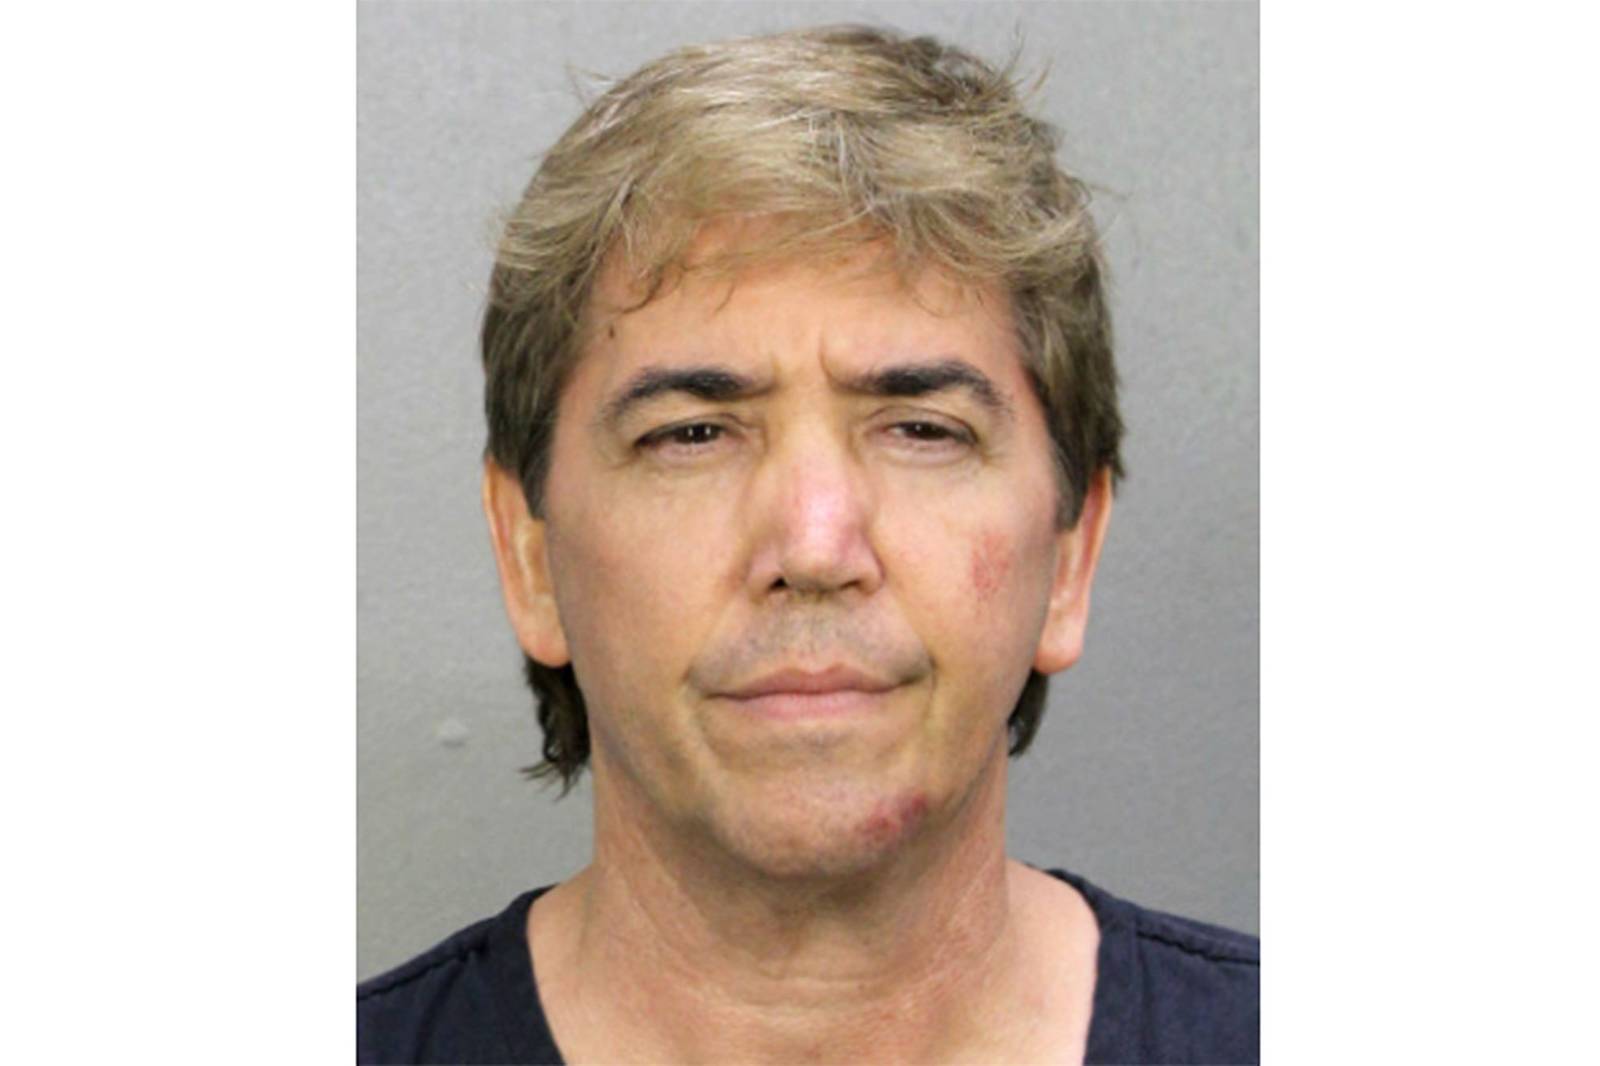 'Florida Man' pleads guilty to child porn charges, then goes full 'Florida Man'